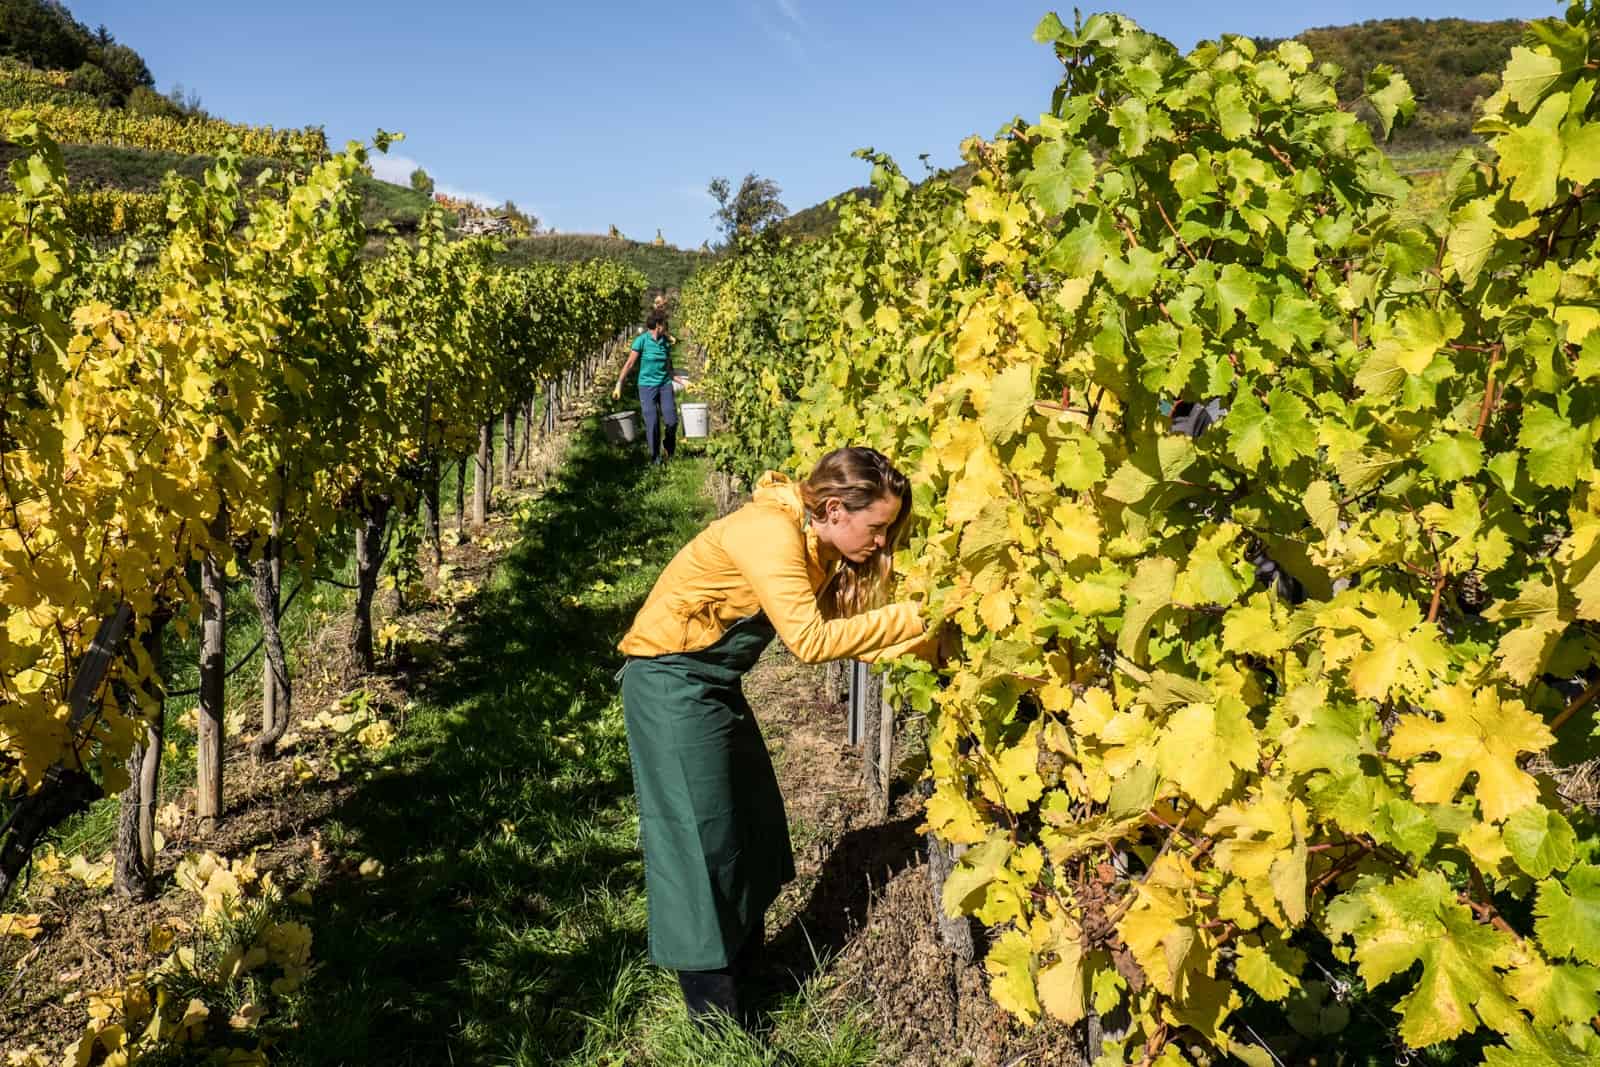 A woman in a yellow jacket and green apron picks wine grapes from yellow vine leaves in a vineyard in the Wachau Valley Austria